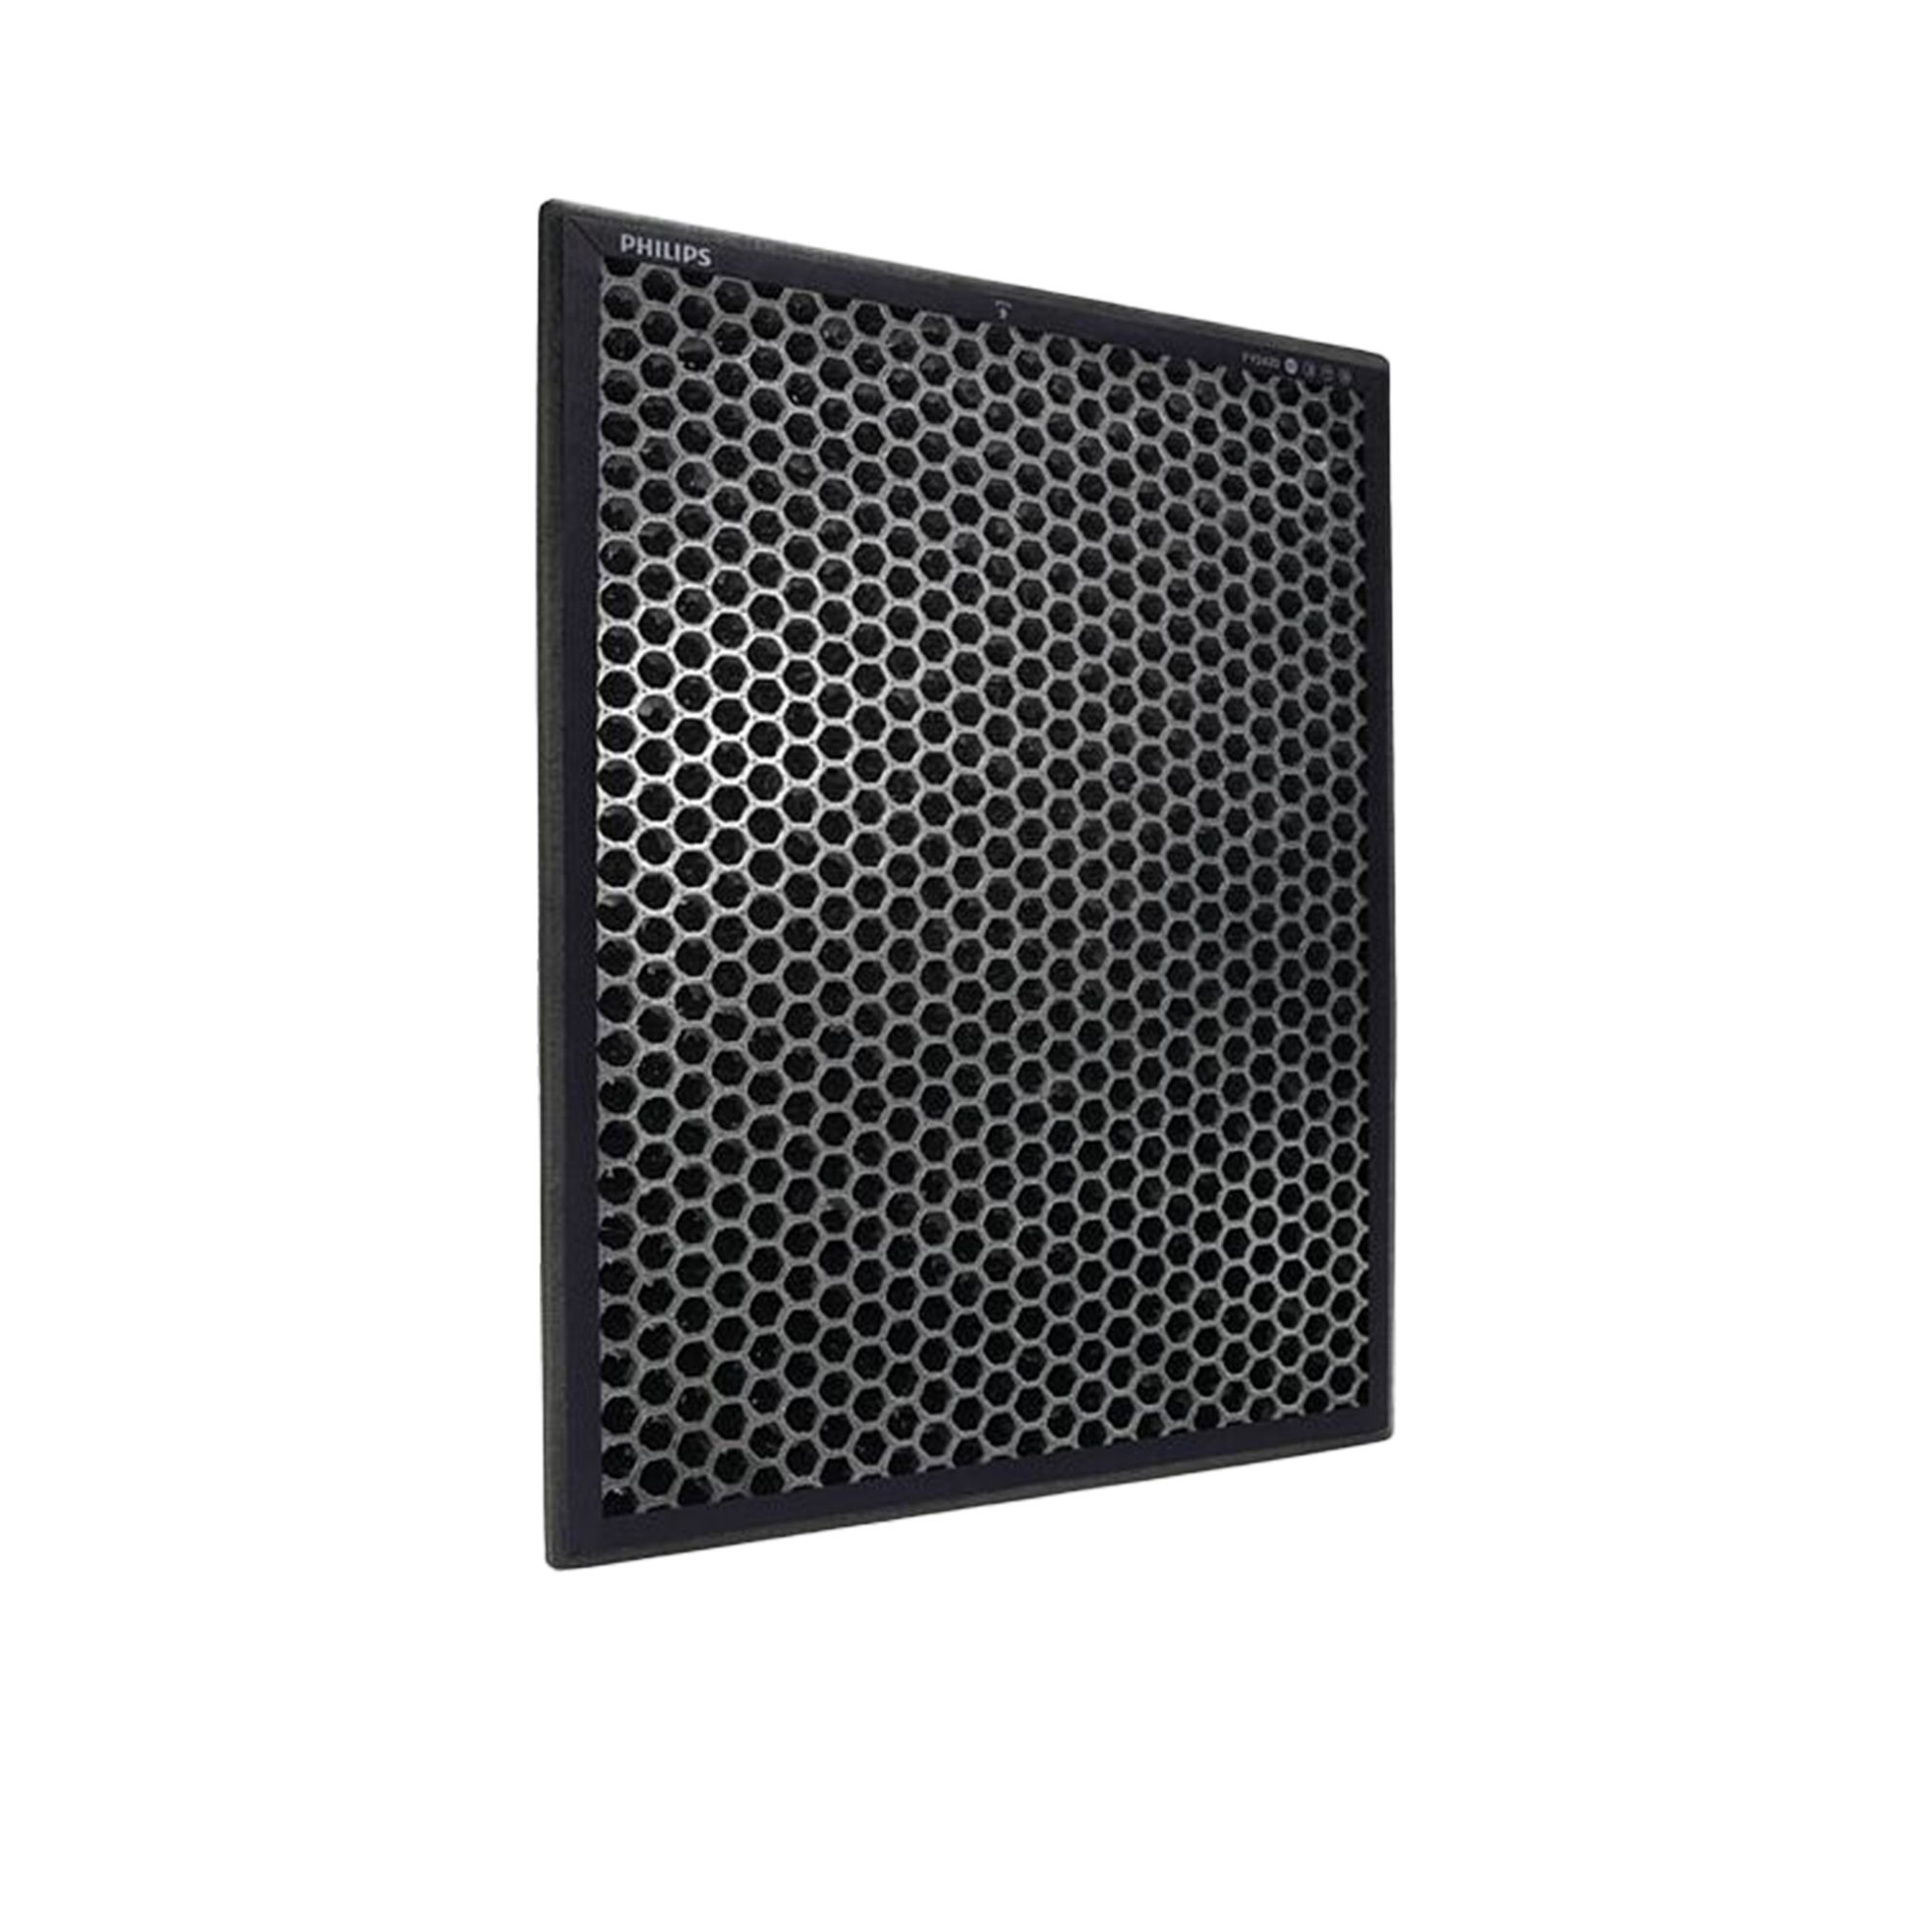 Philips NanoProtect 1000 Series AC Filter Replacement for AC1215/70 Image 1